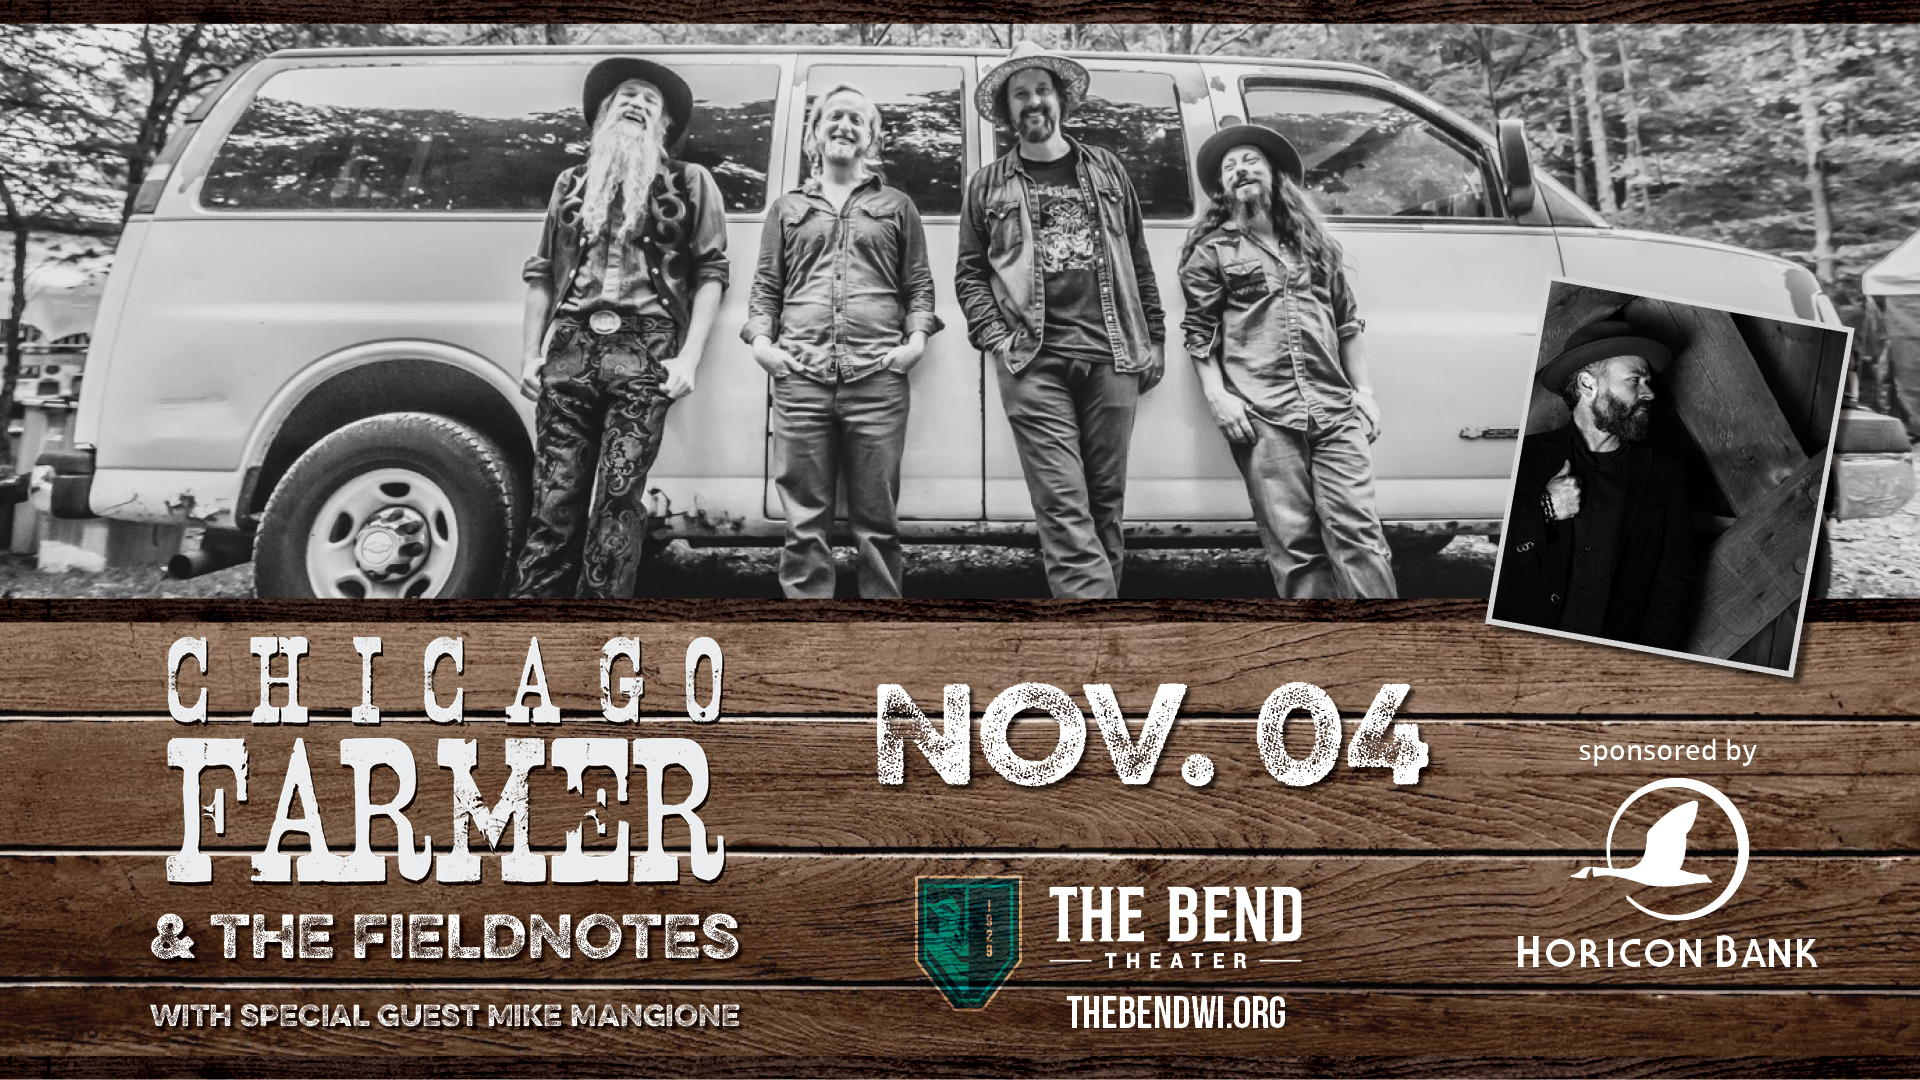 Chicago Farmer Live at The Bend Theater